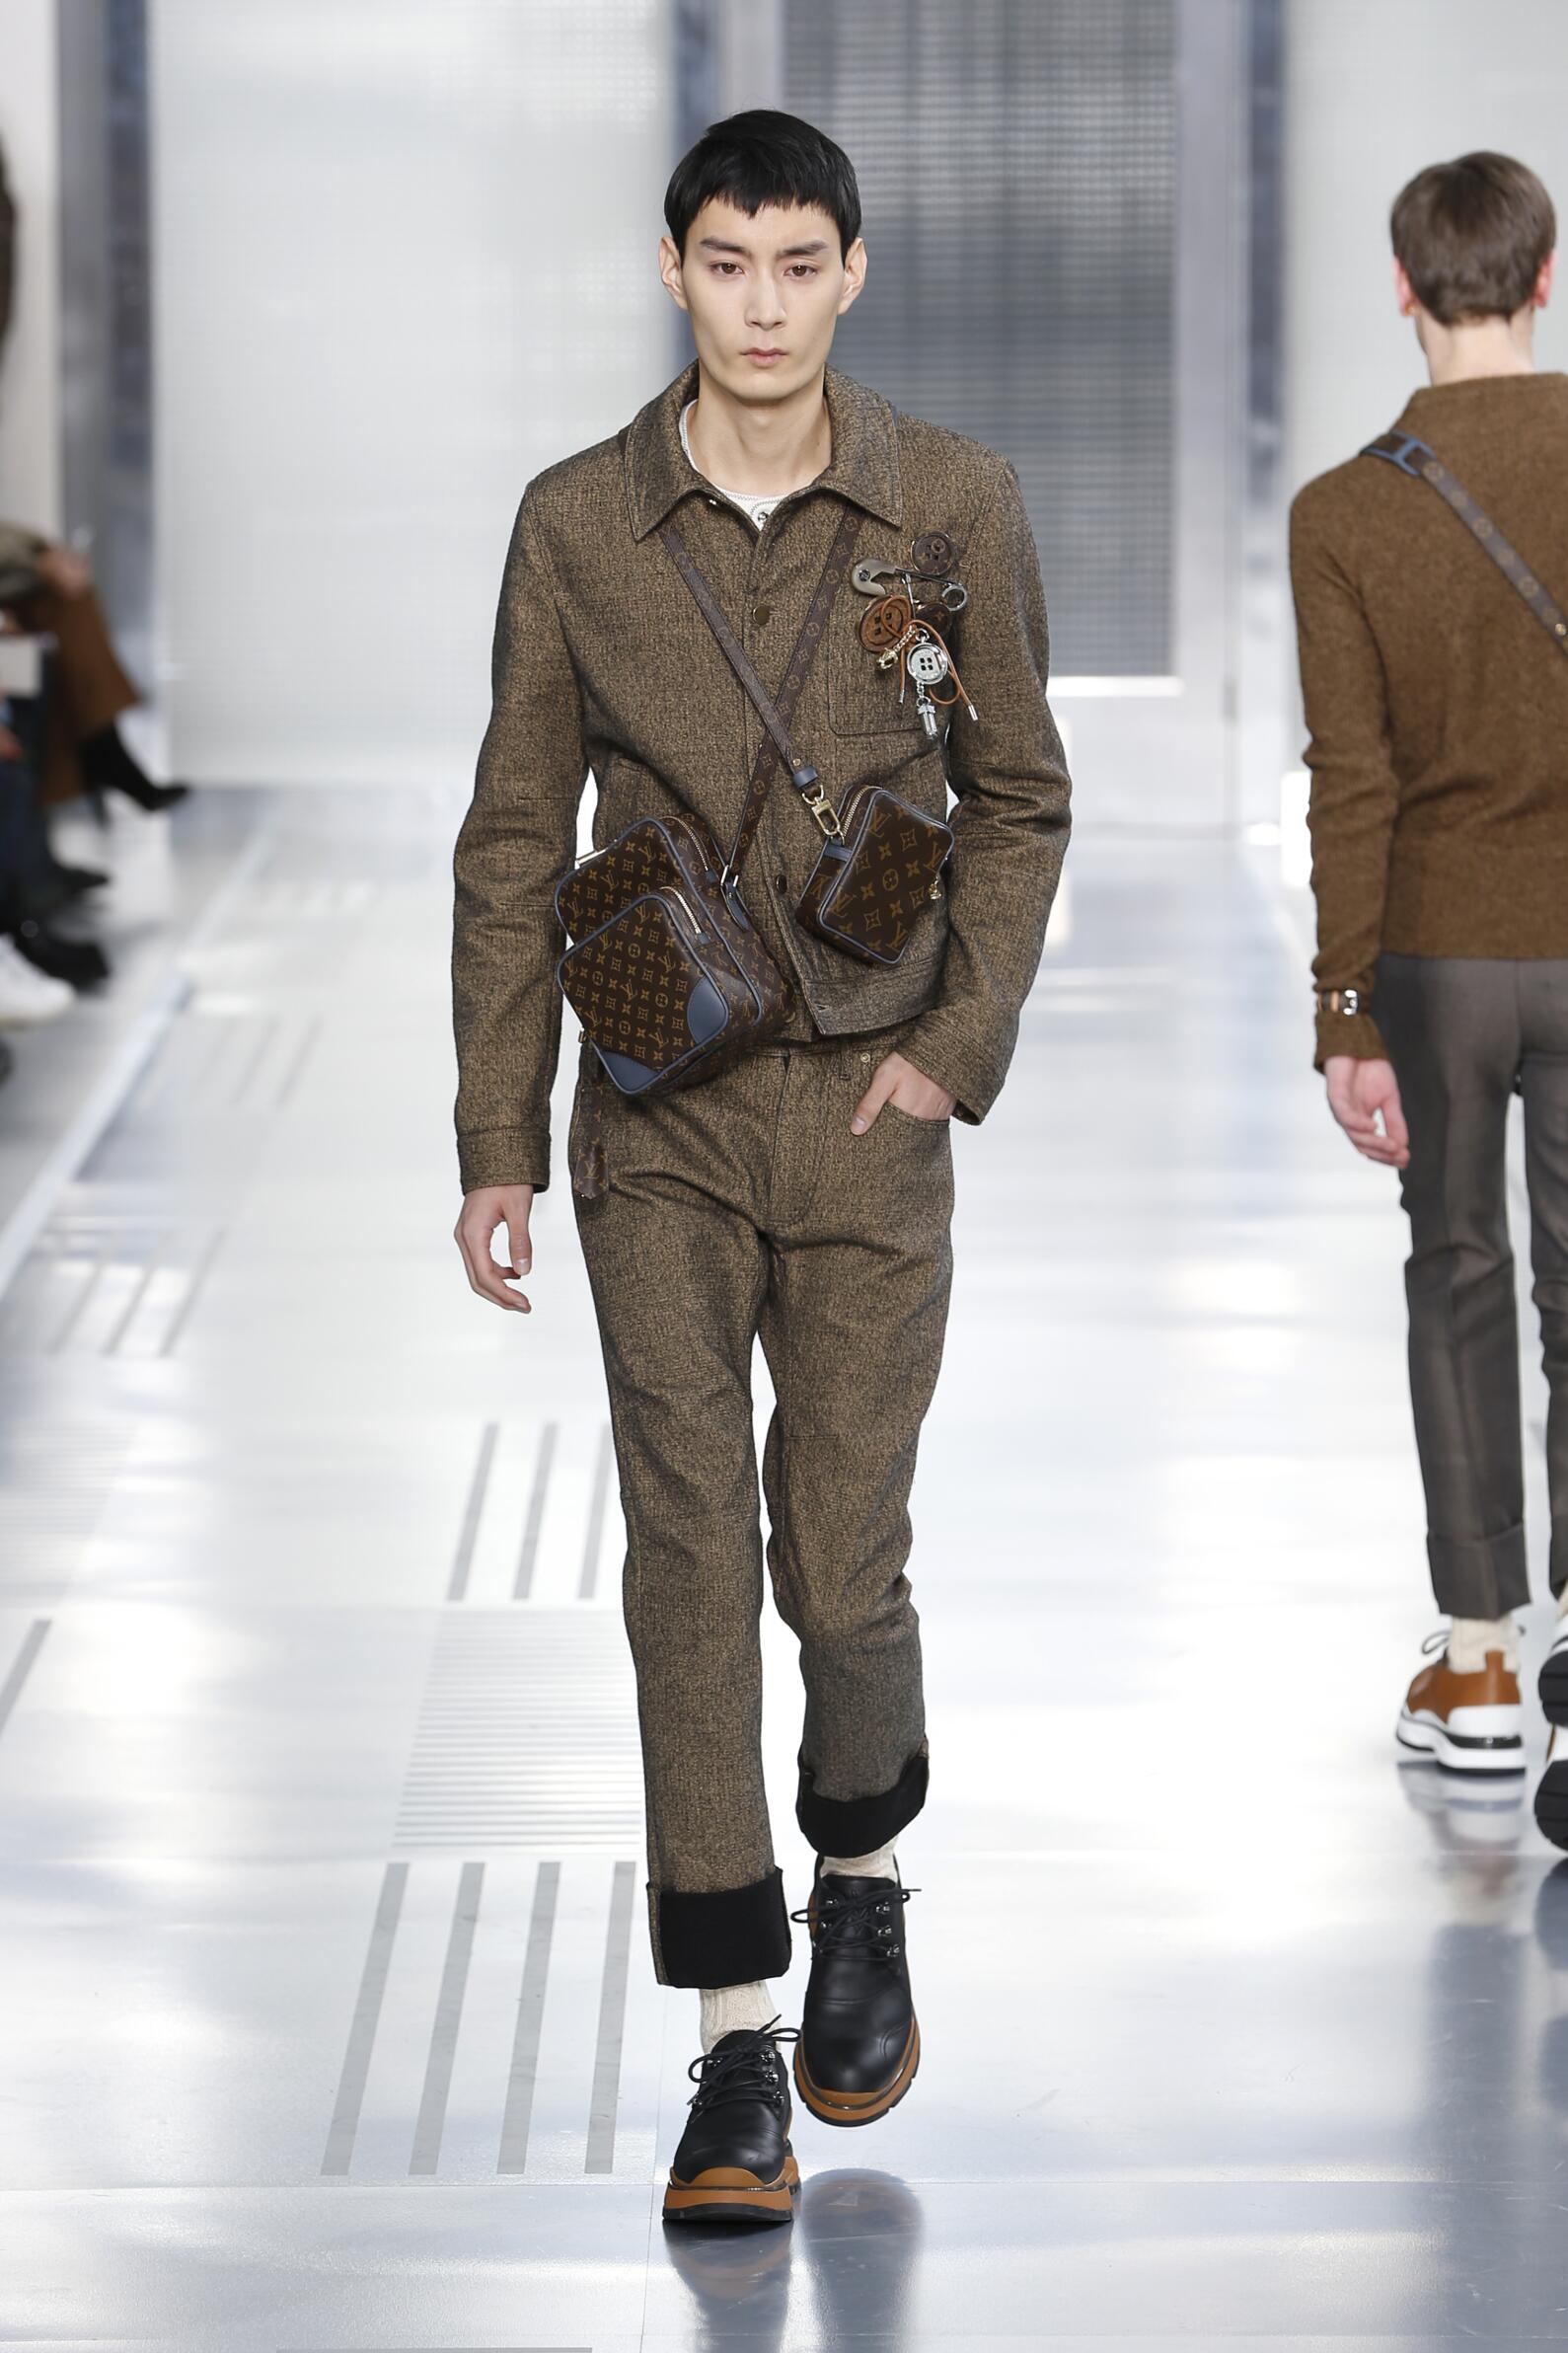 LOUIS VUITTON FALL WINTER 2015-16 MEN’S COLLECTION | The Skinny Beep